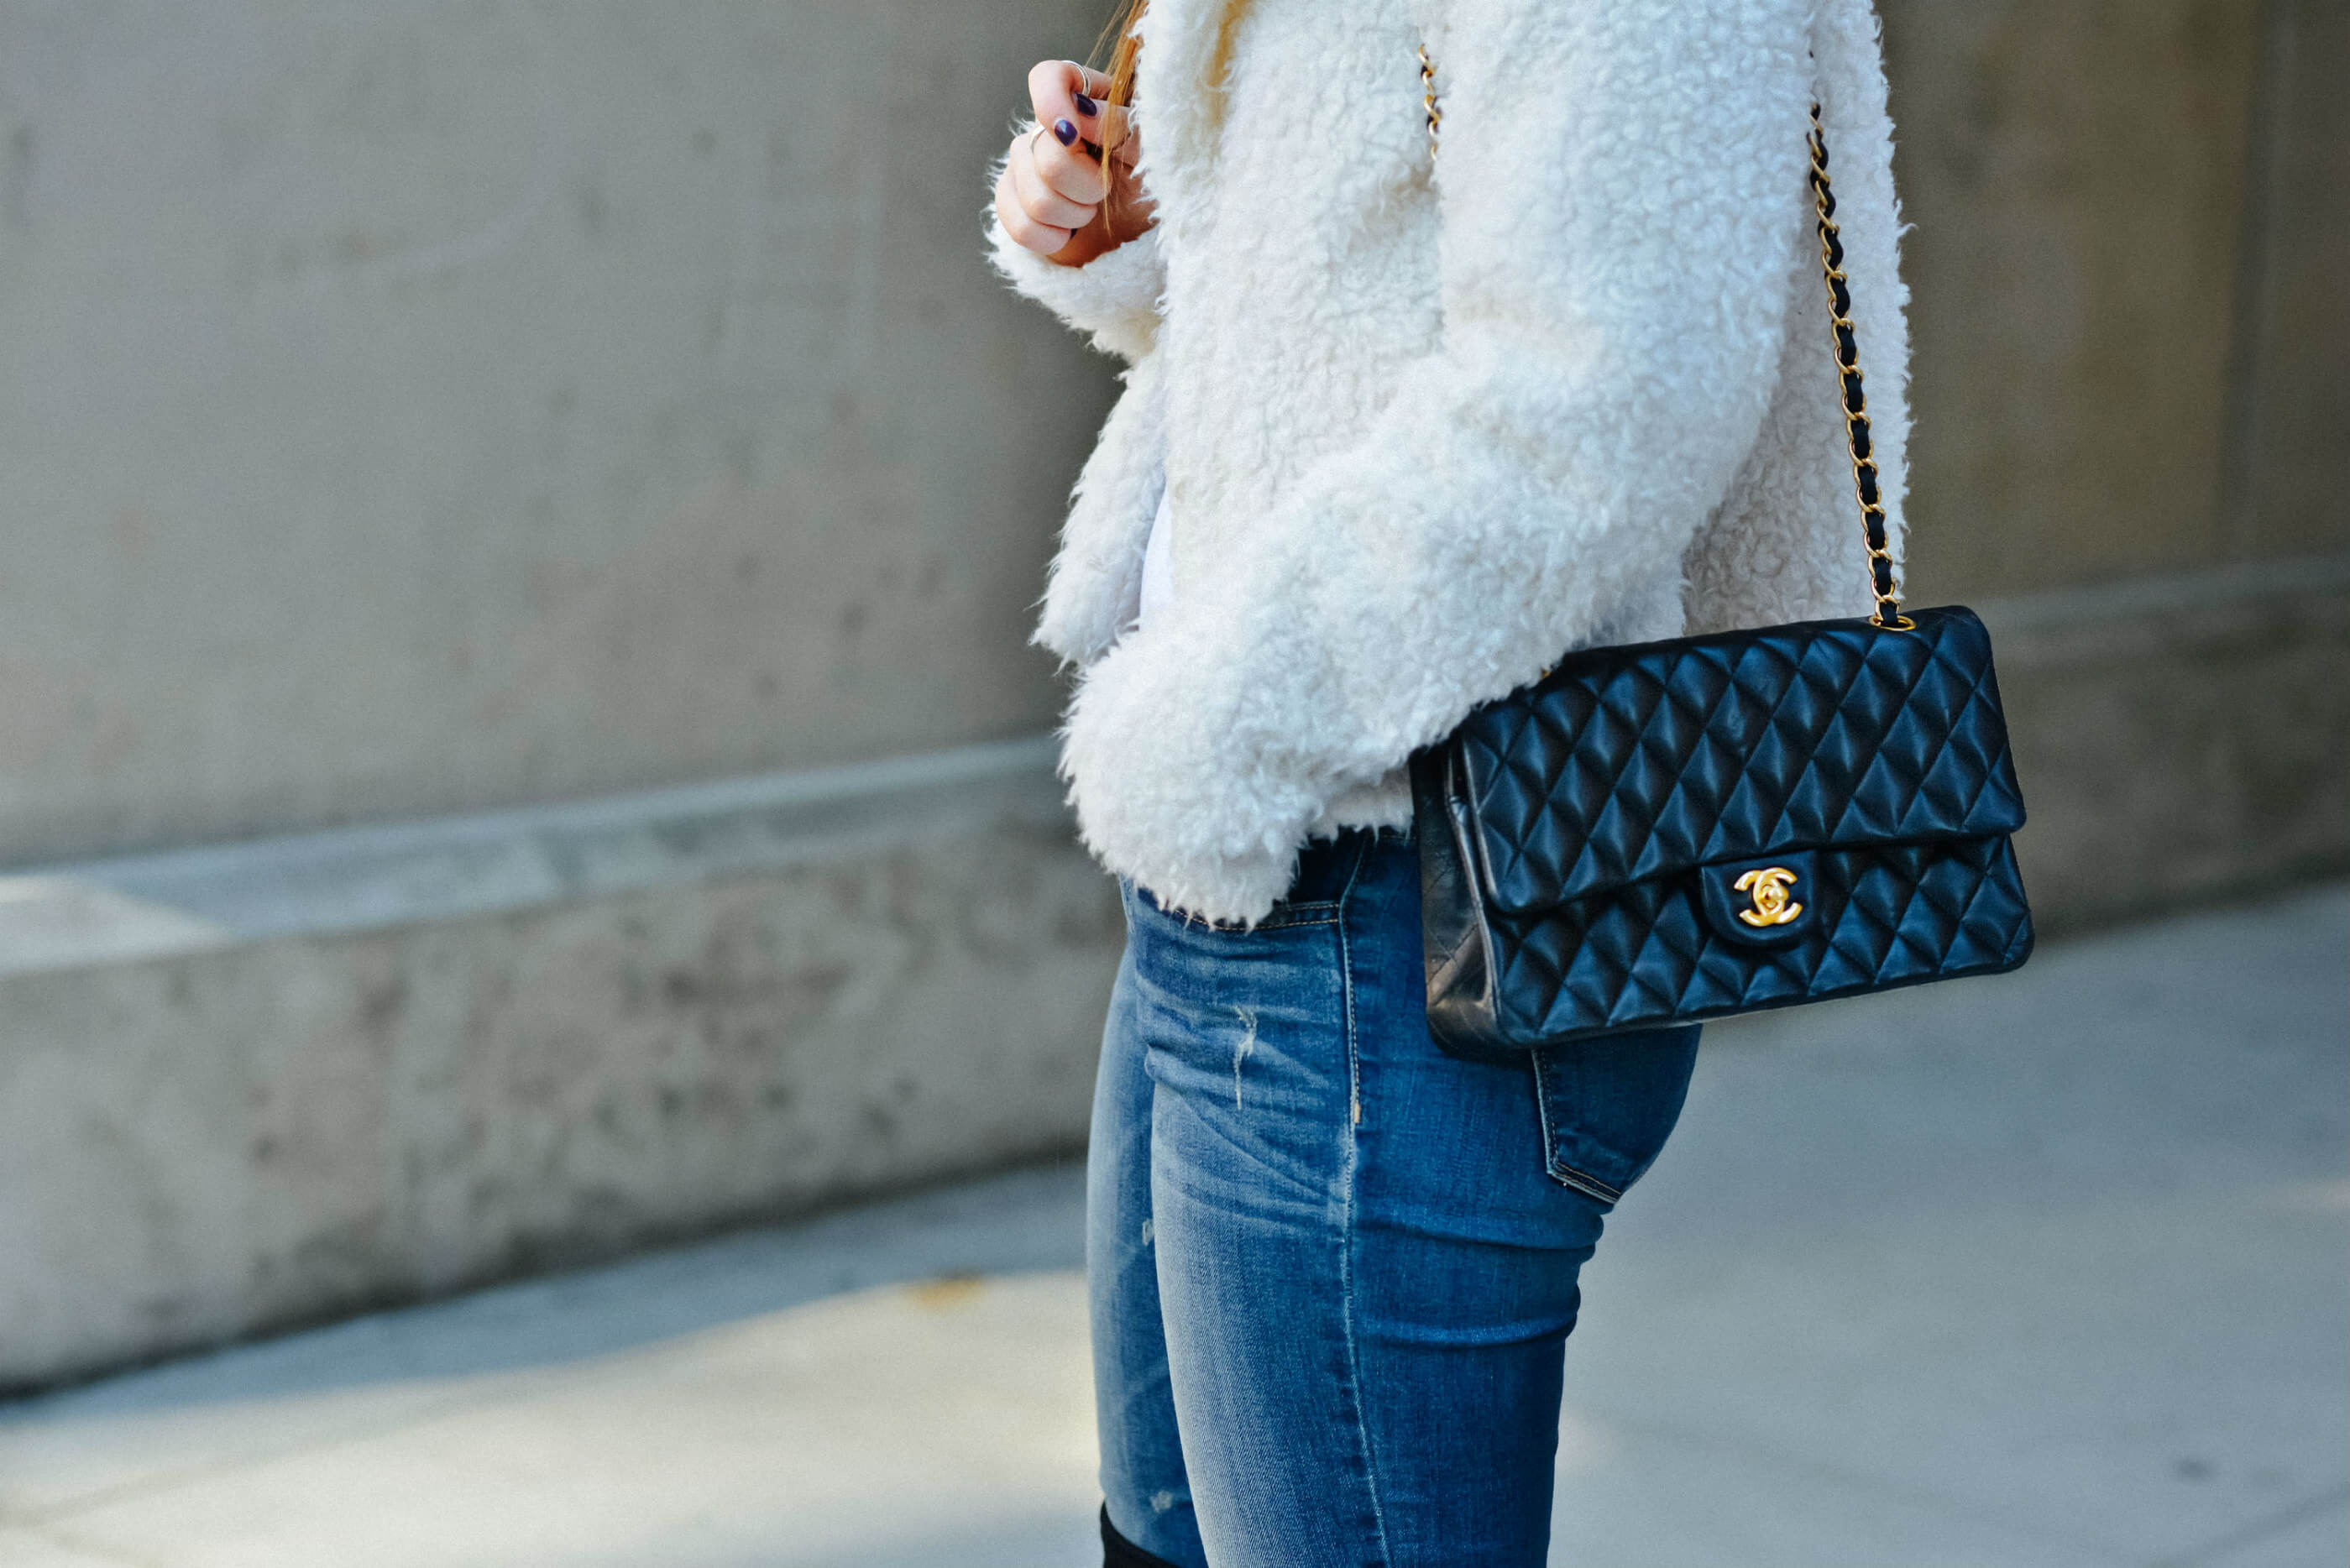 Chanel Flap Bag, Tilden of To Be Bright